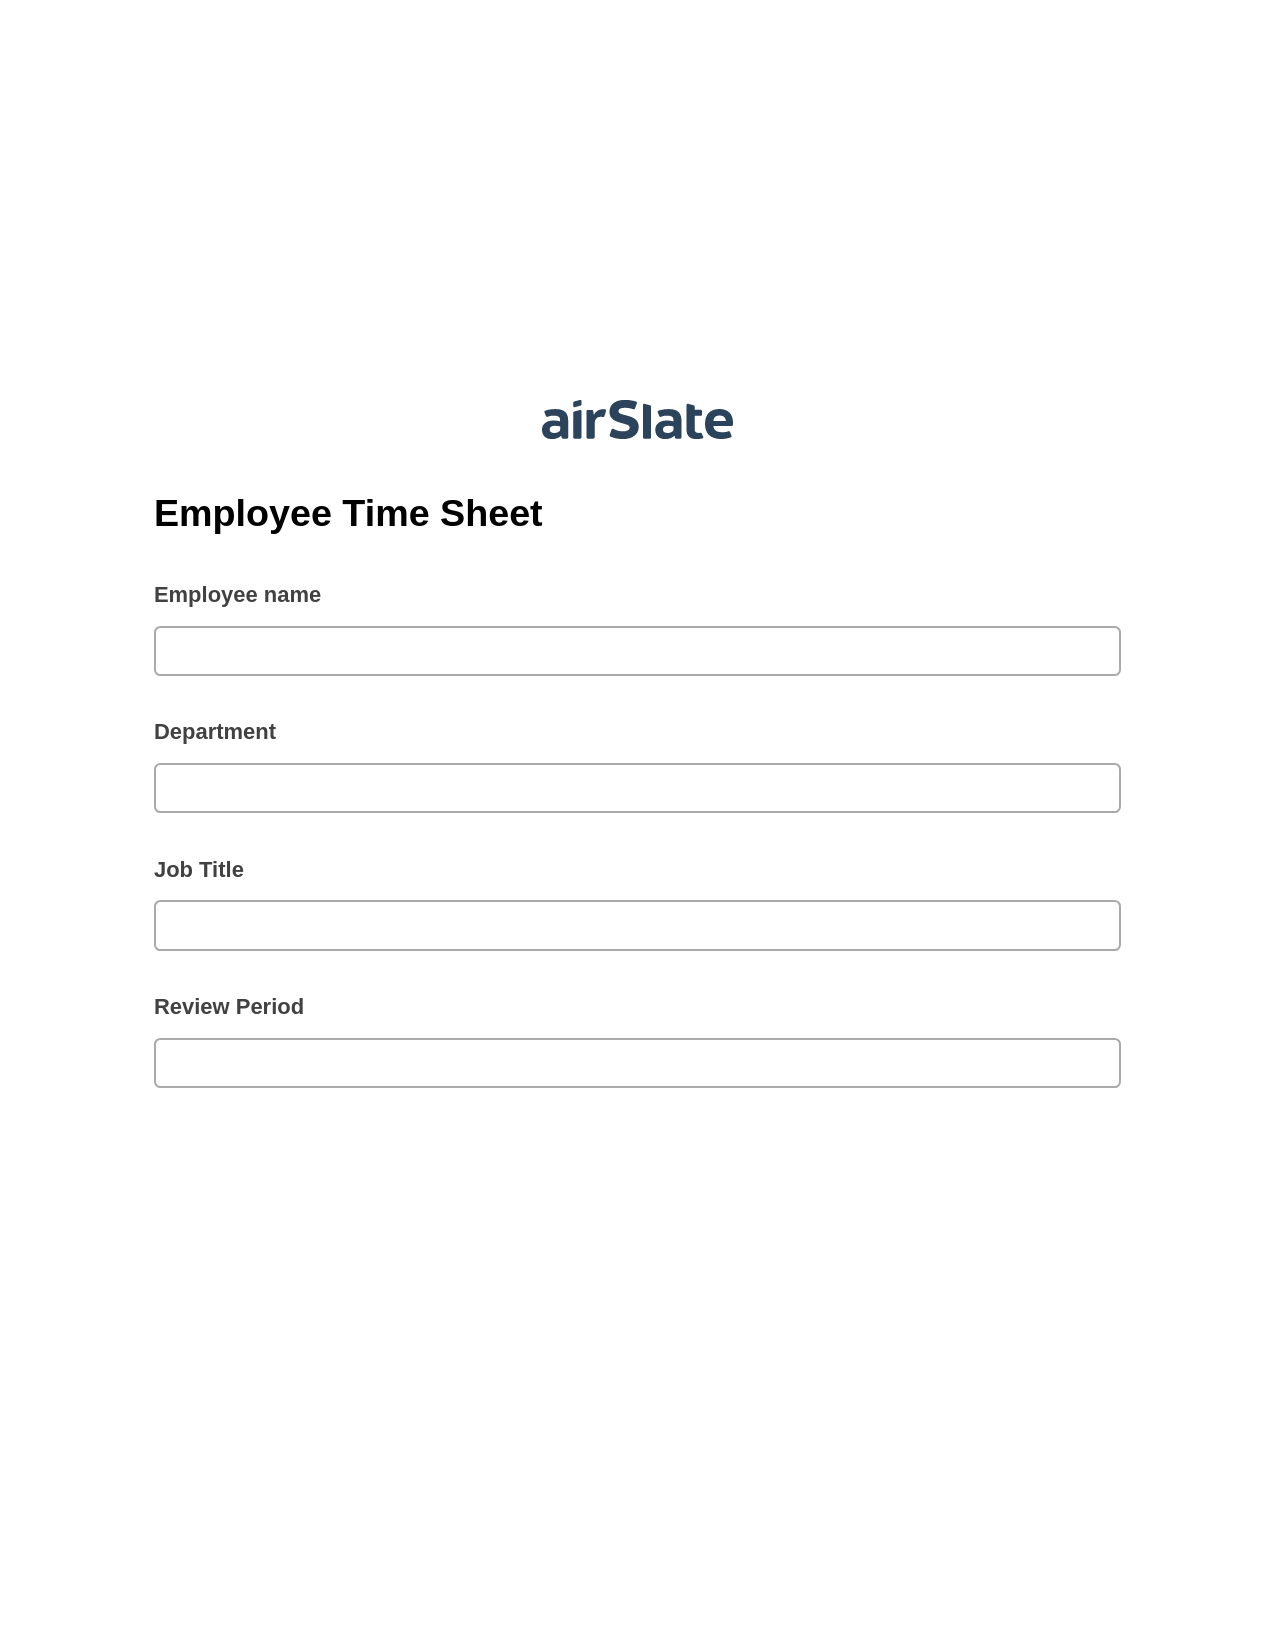 Employee Time Sheet Pre-fill from MySQL Bot, Create slate addon, Export to Excel 365 Bot